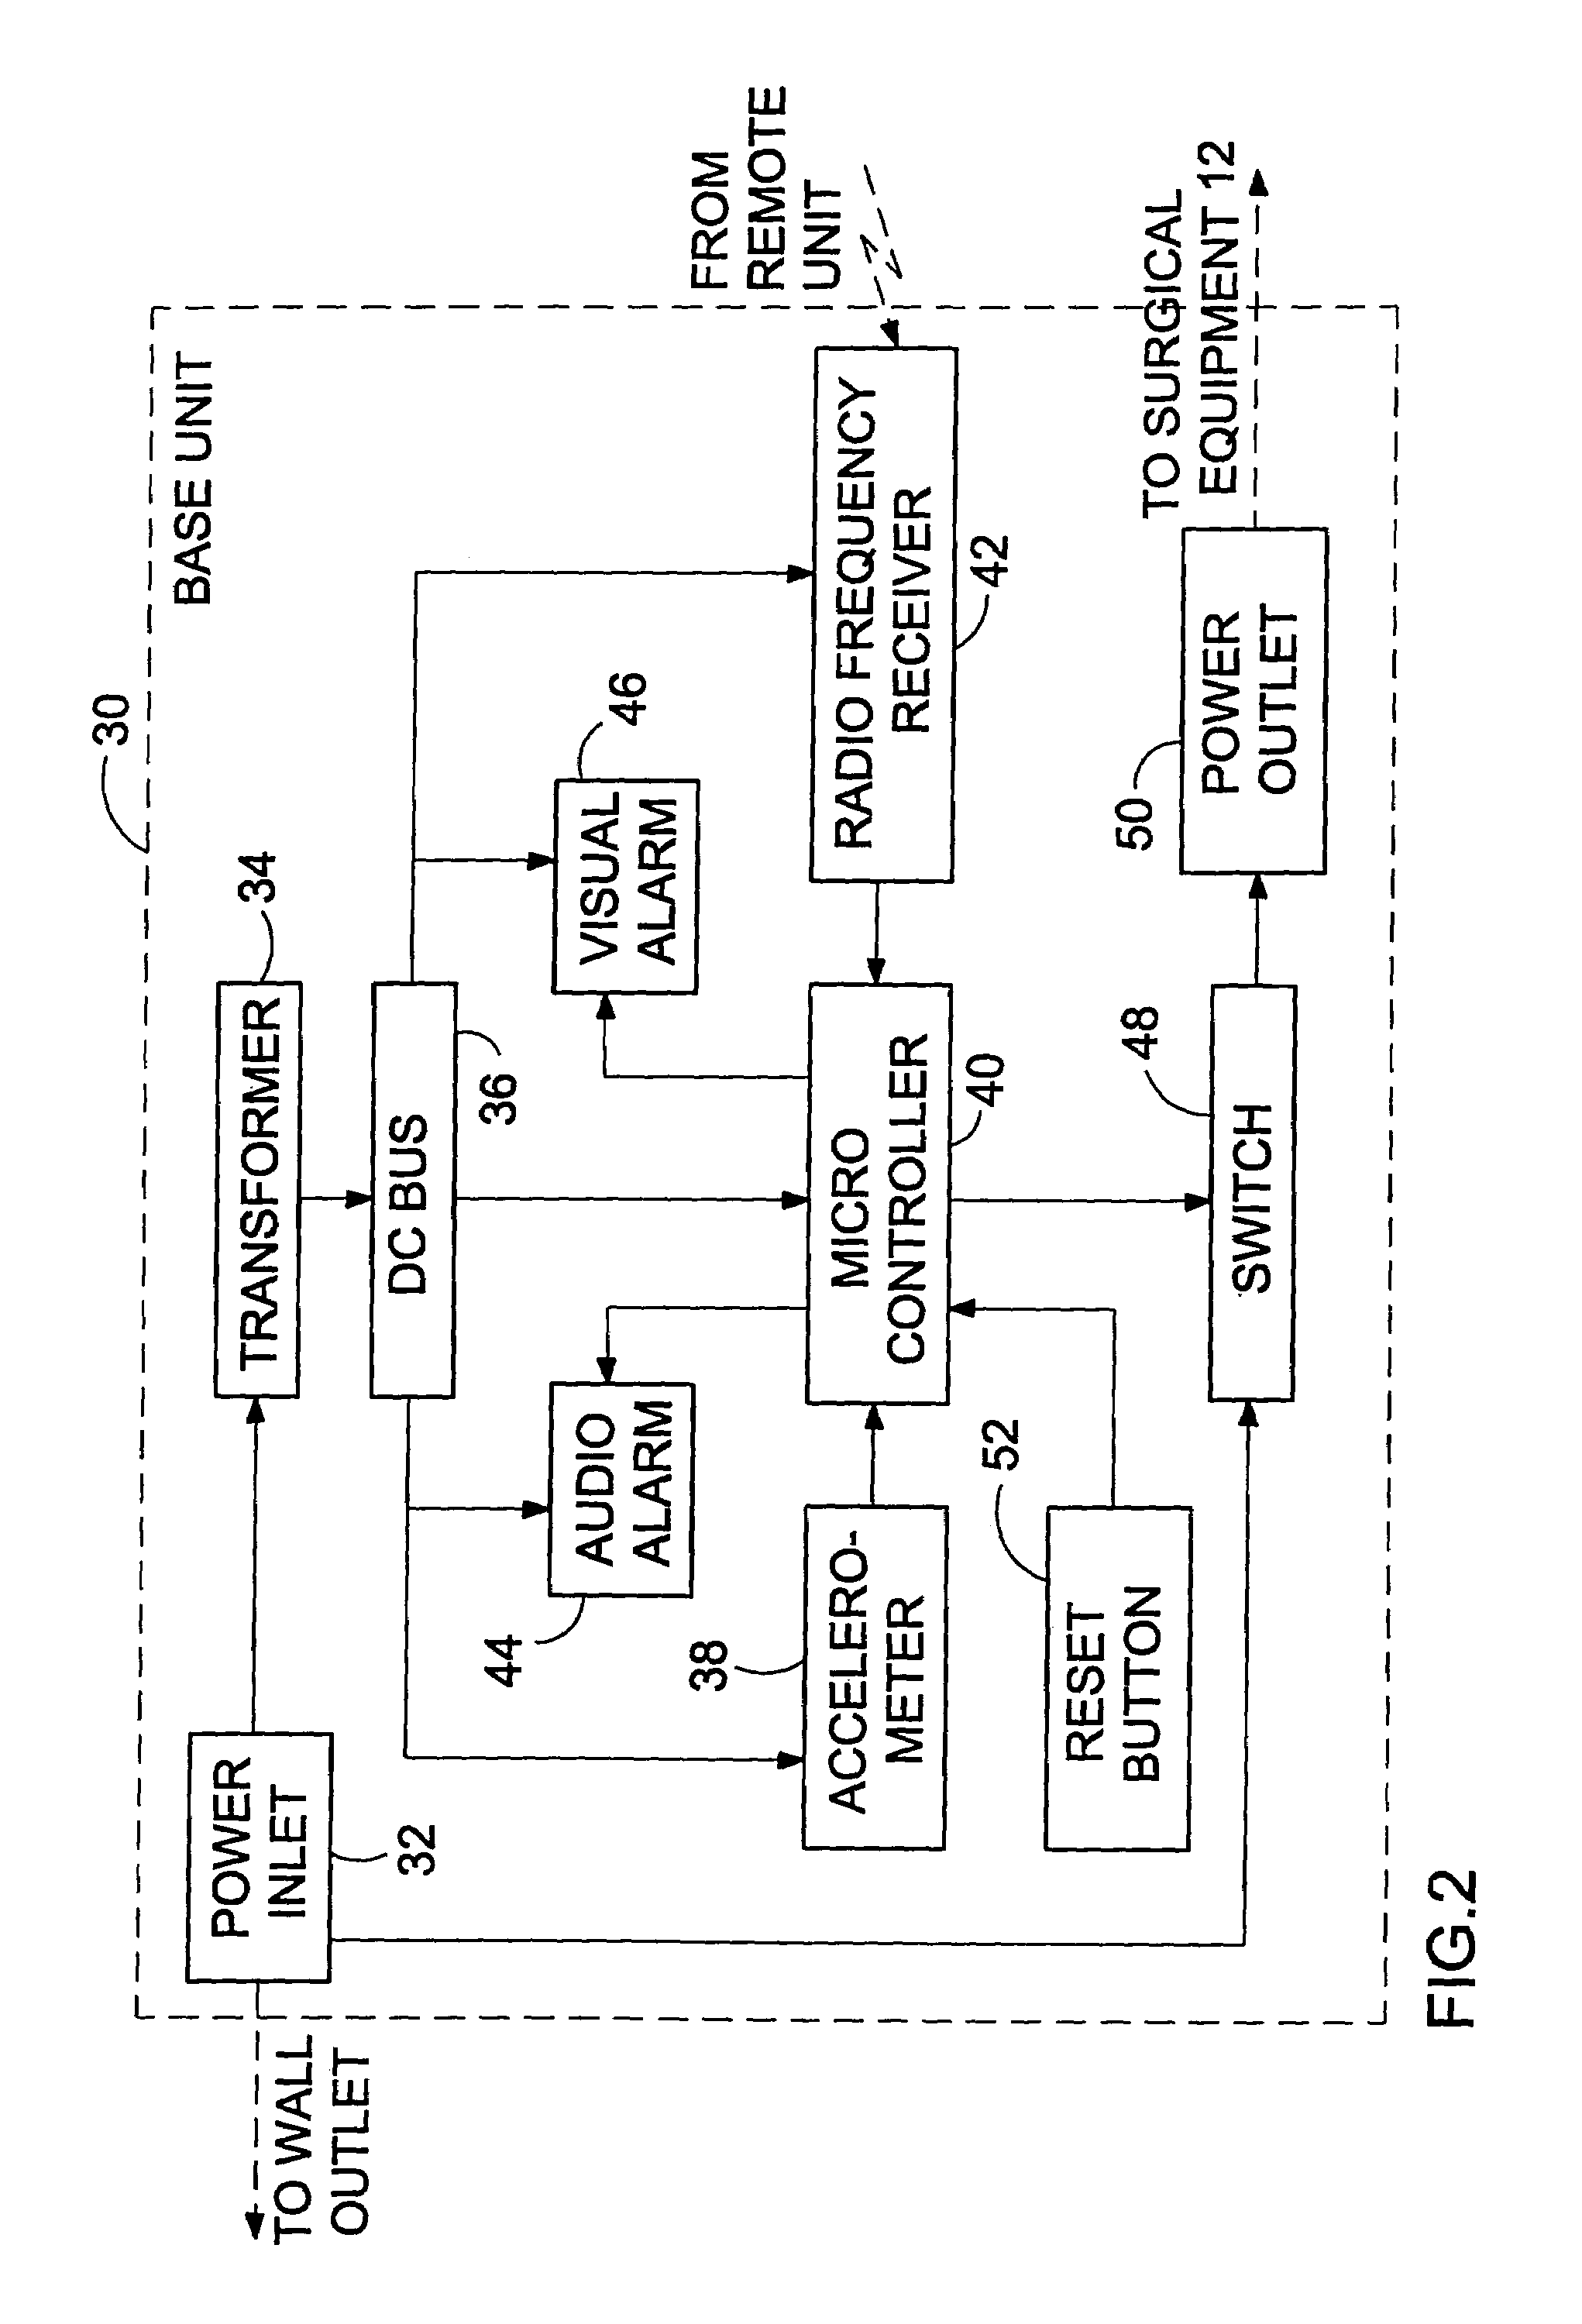 Medical surgery safety device